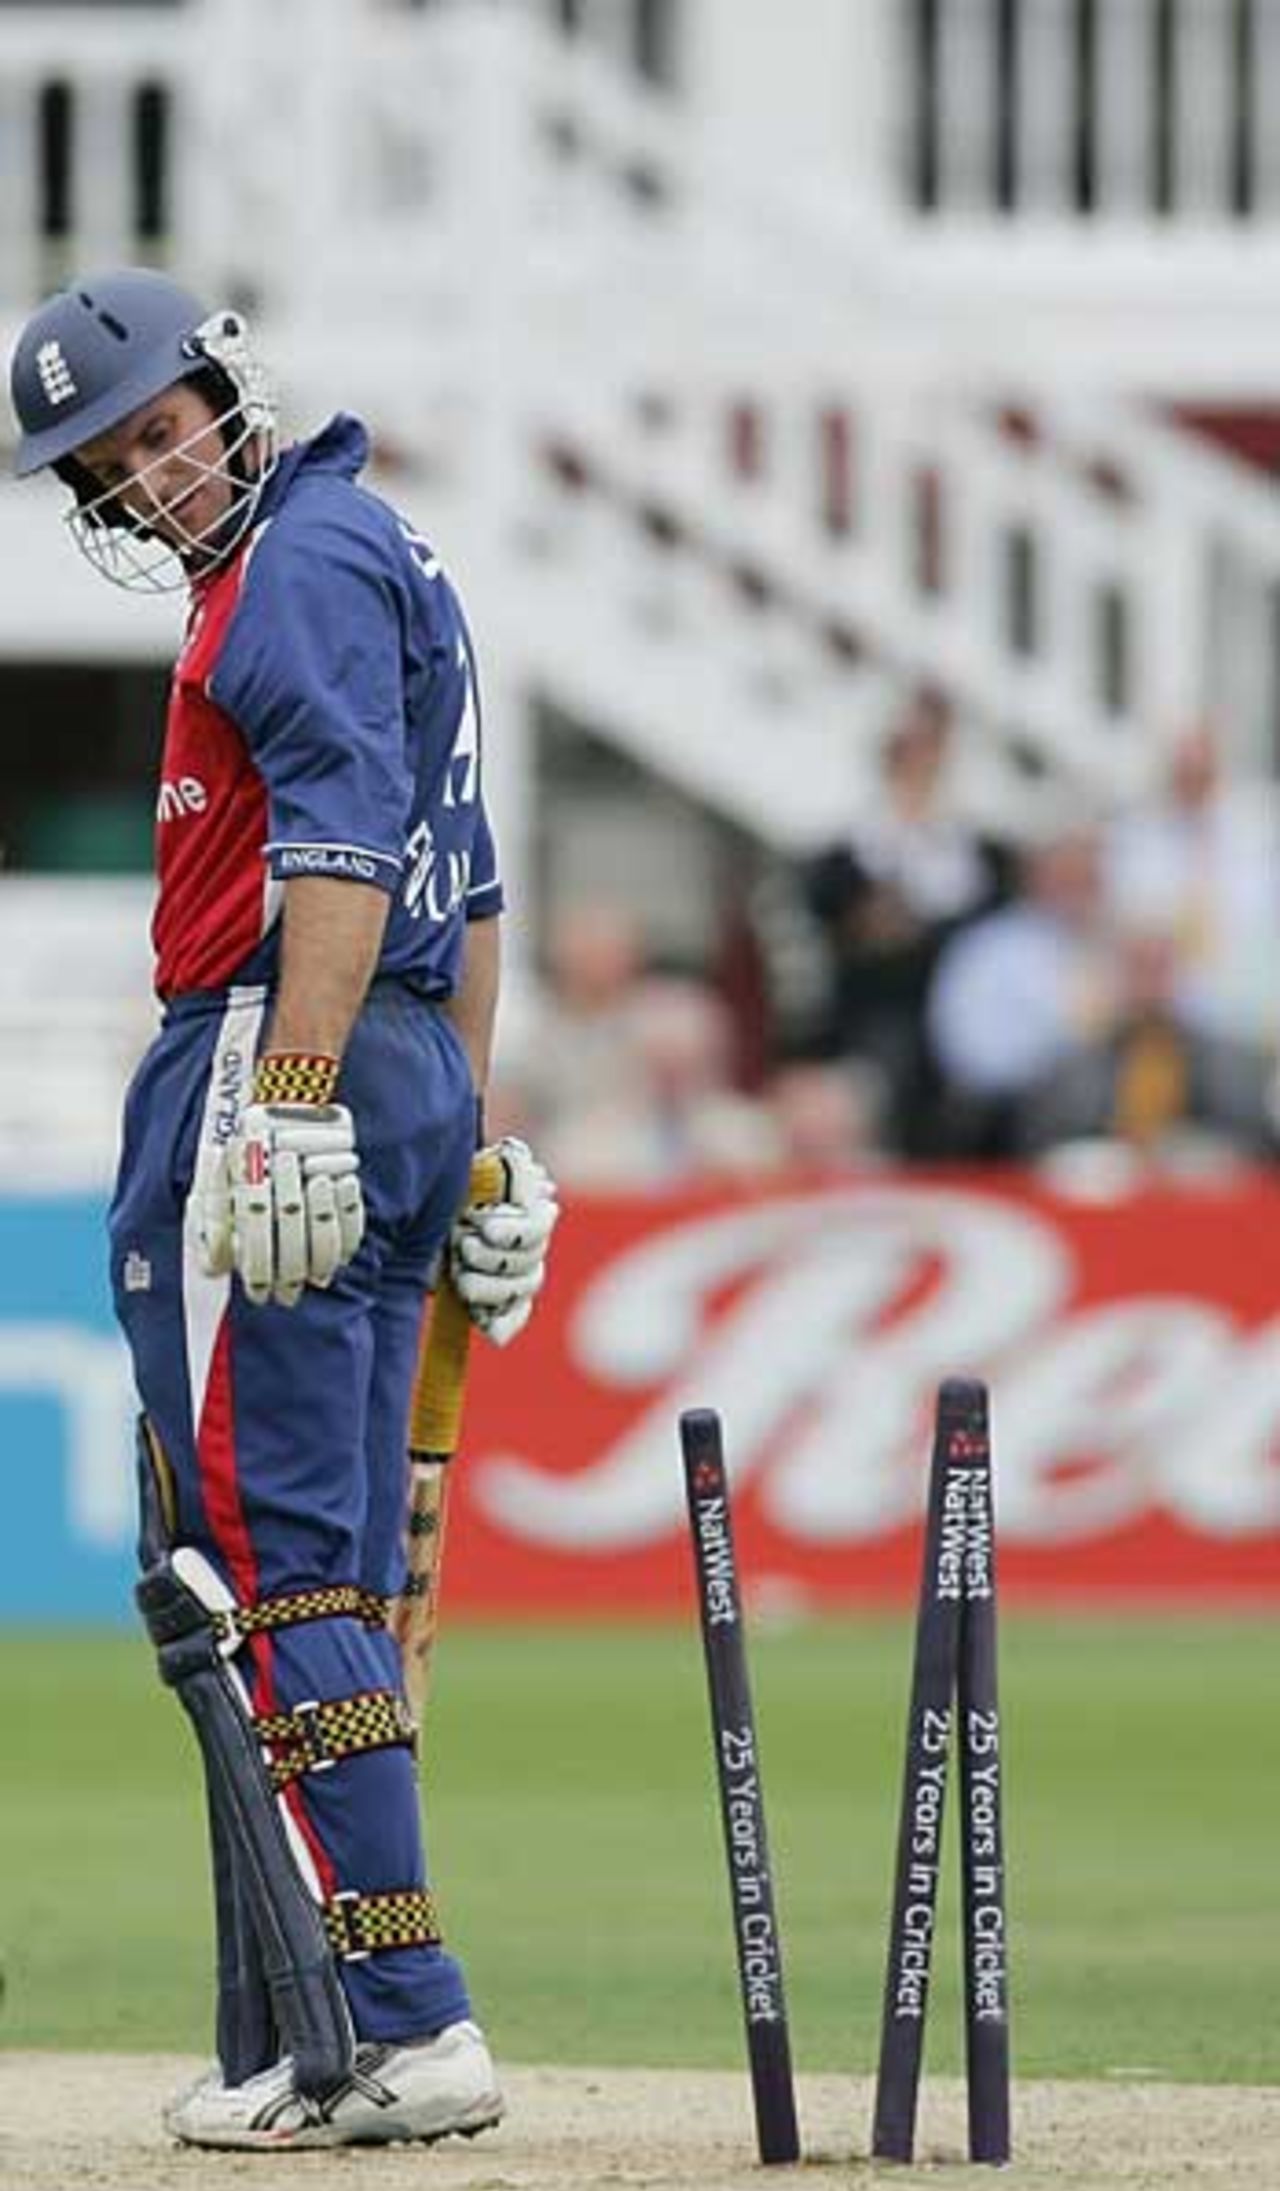 Andrew Strauss surveys the damage after being bowled by Brett Lee, England v Australia, NatWest Series final, Lord's, July 2